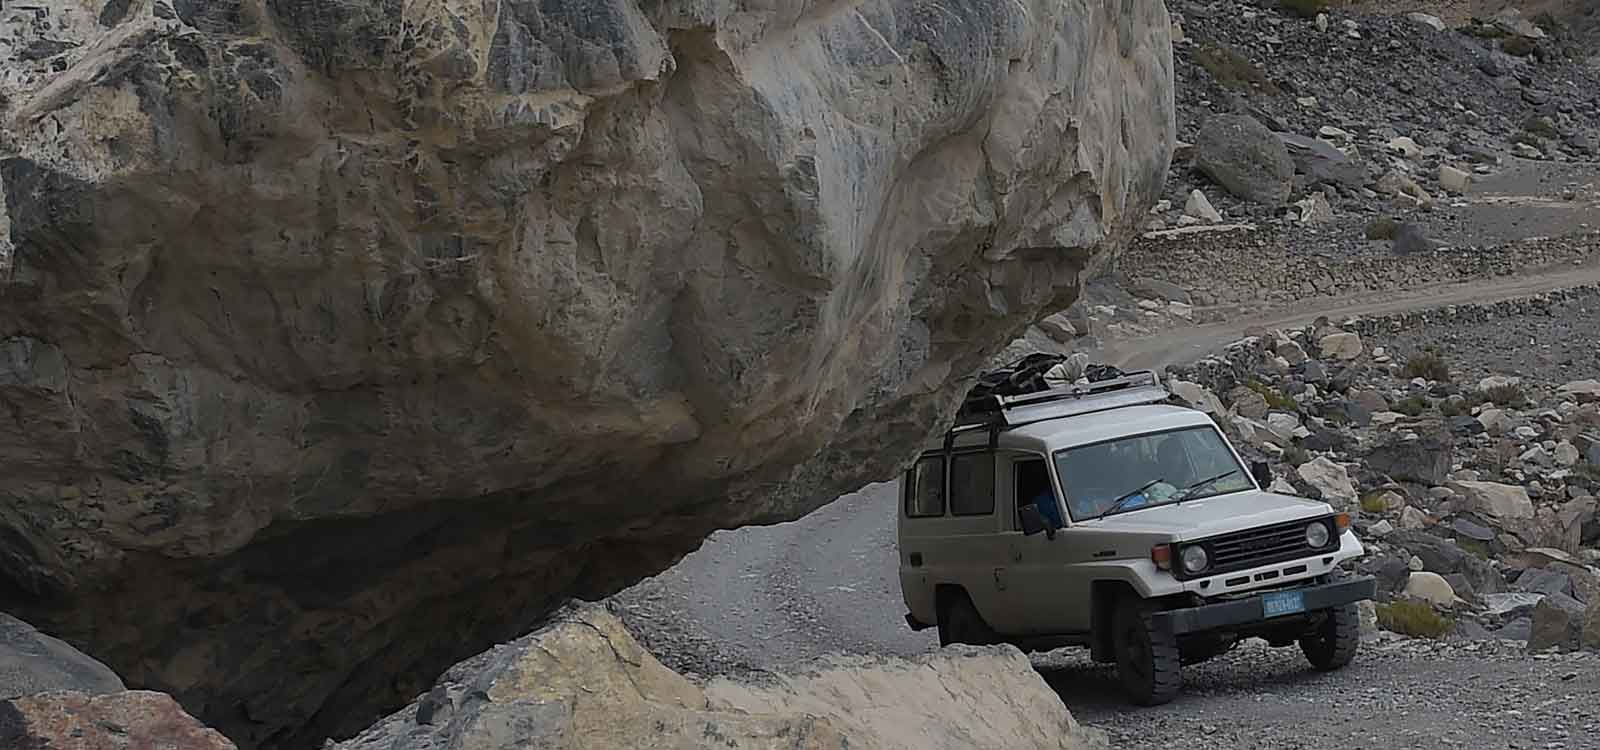 Daring death on the remote roads of Pakistan’s Hunza